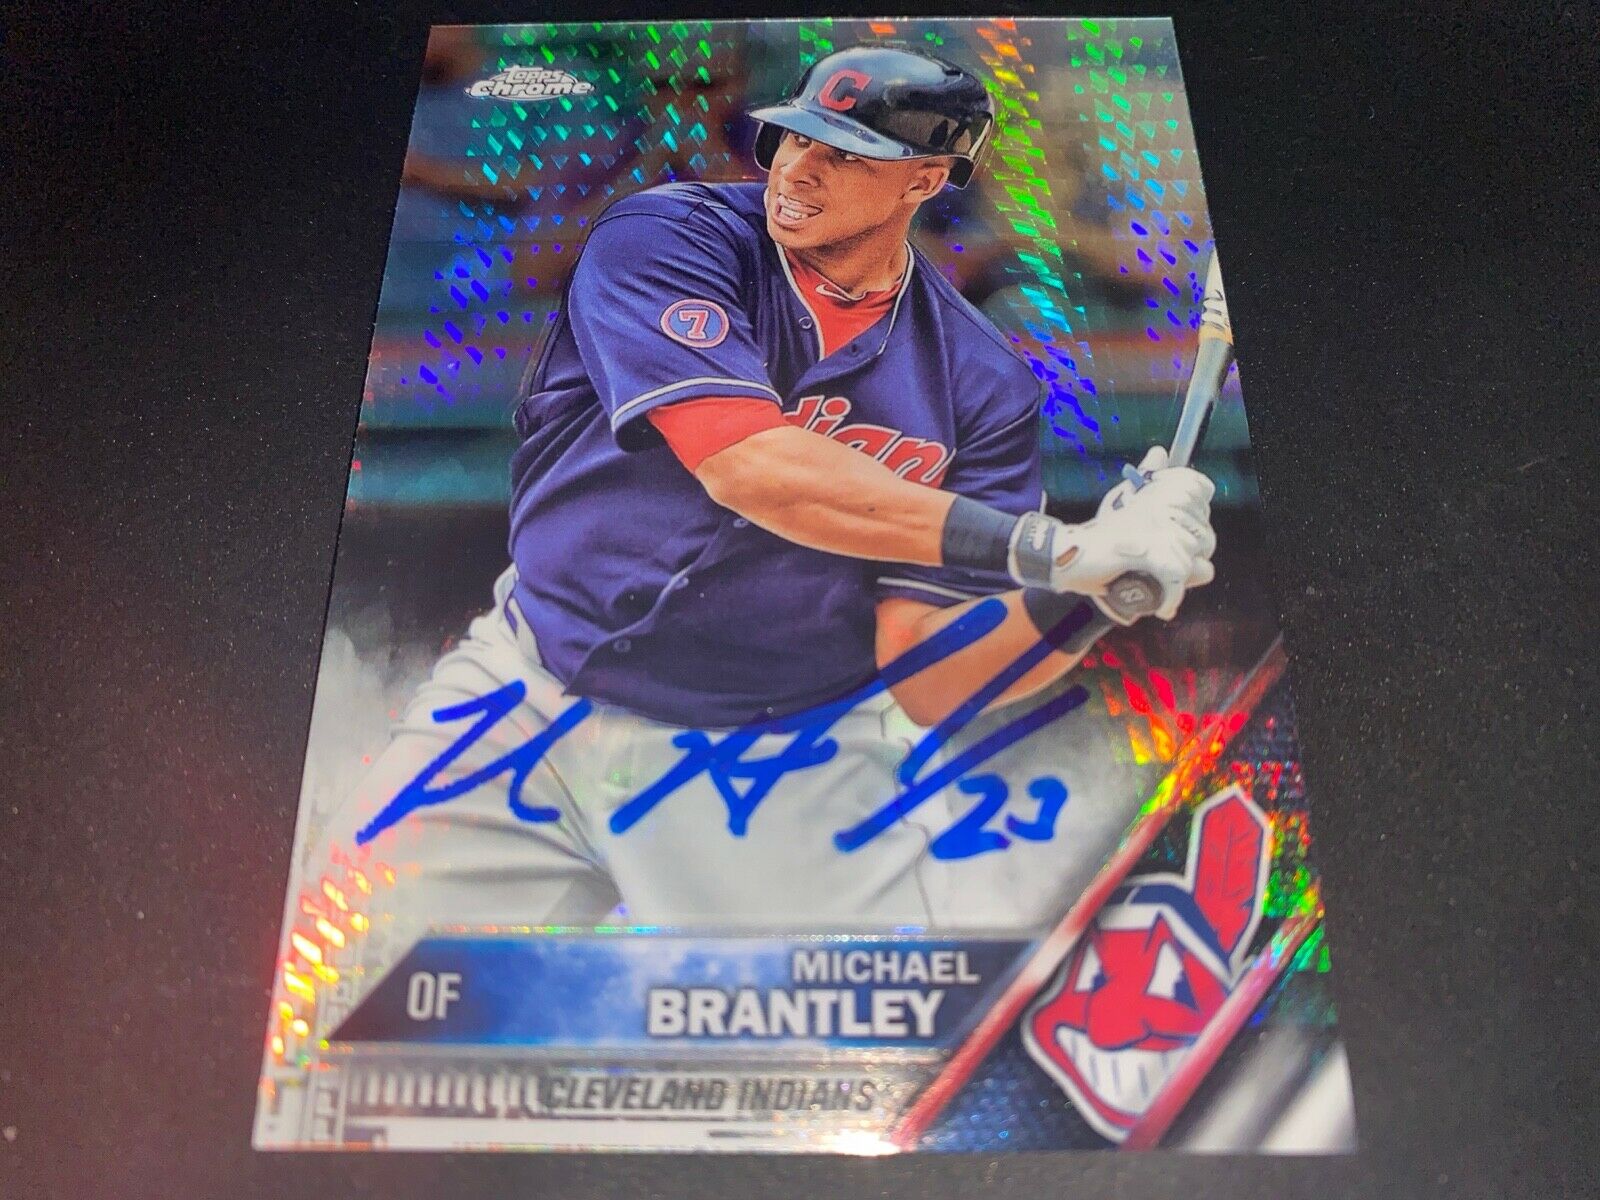 Michael Brantley Indians 2016 Autographed Signed Topps Chrome Refractor Card